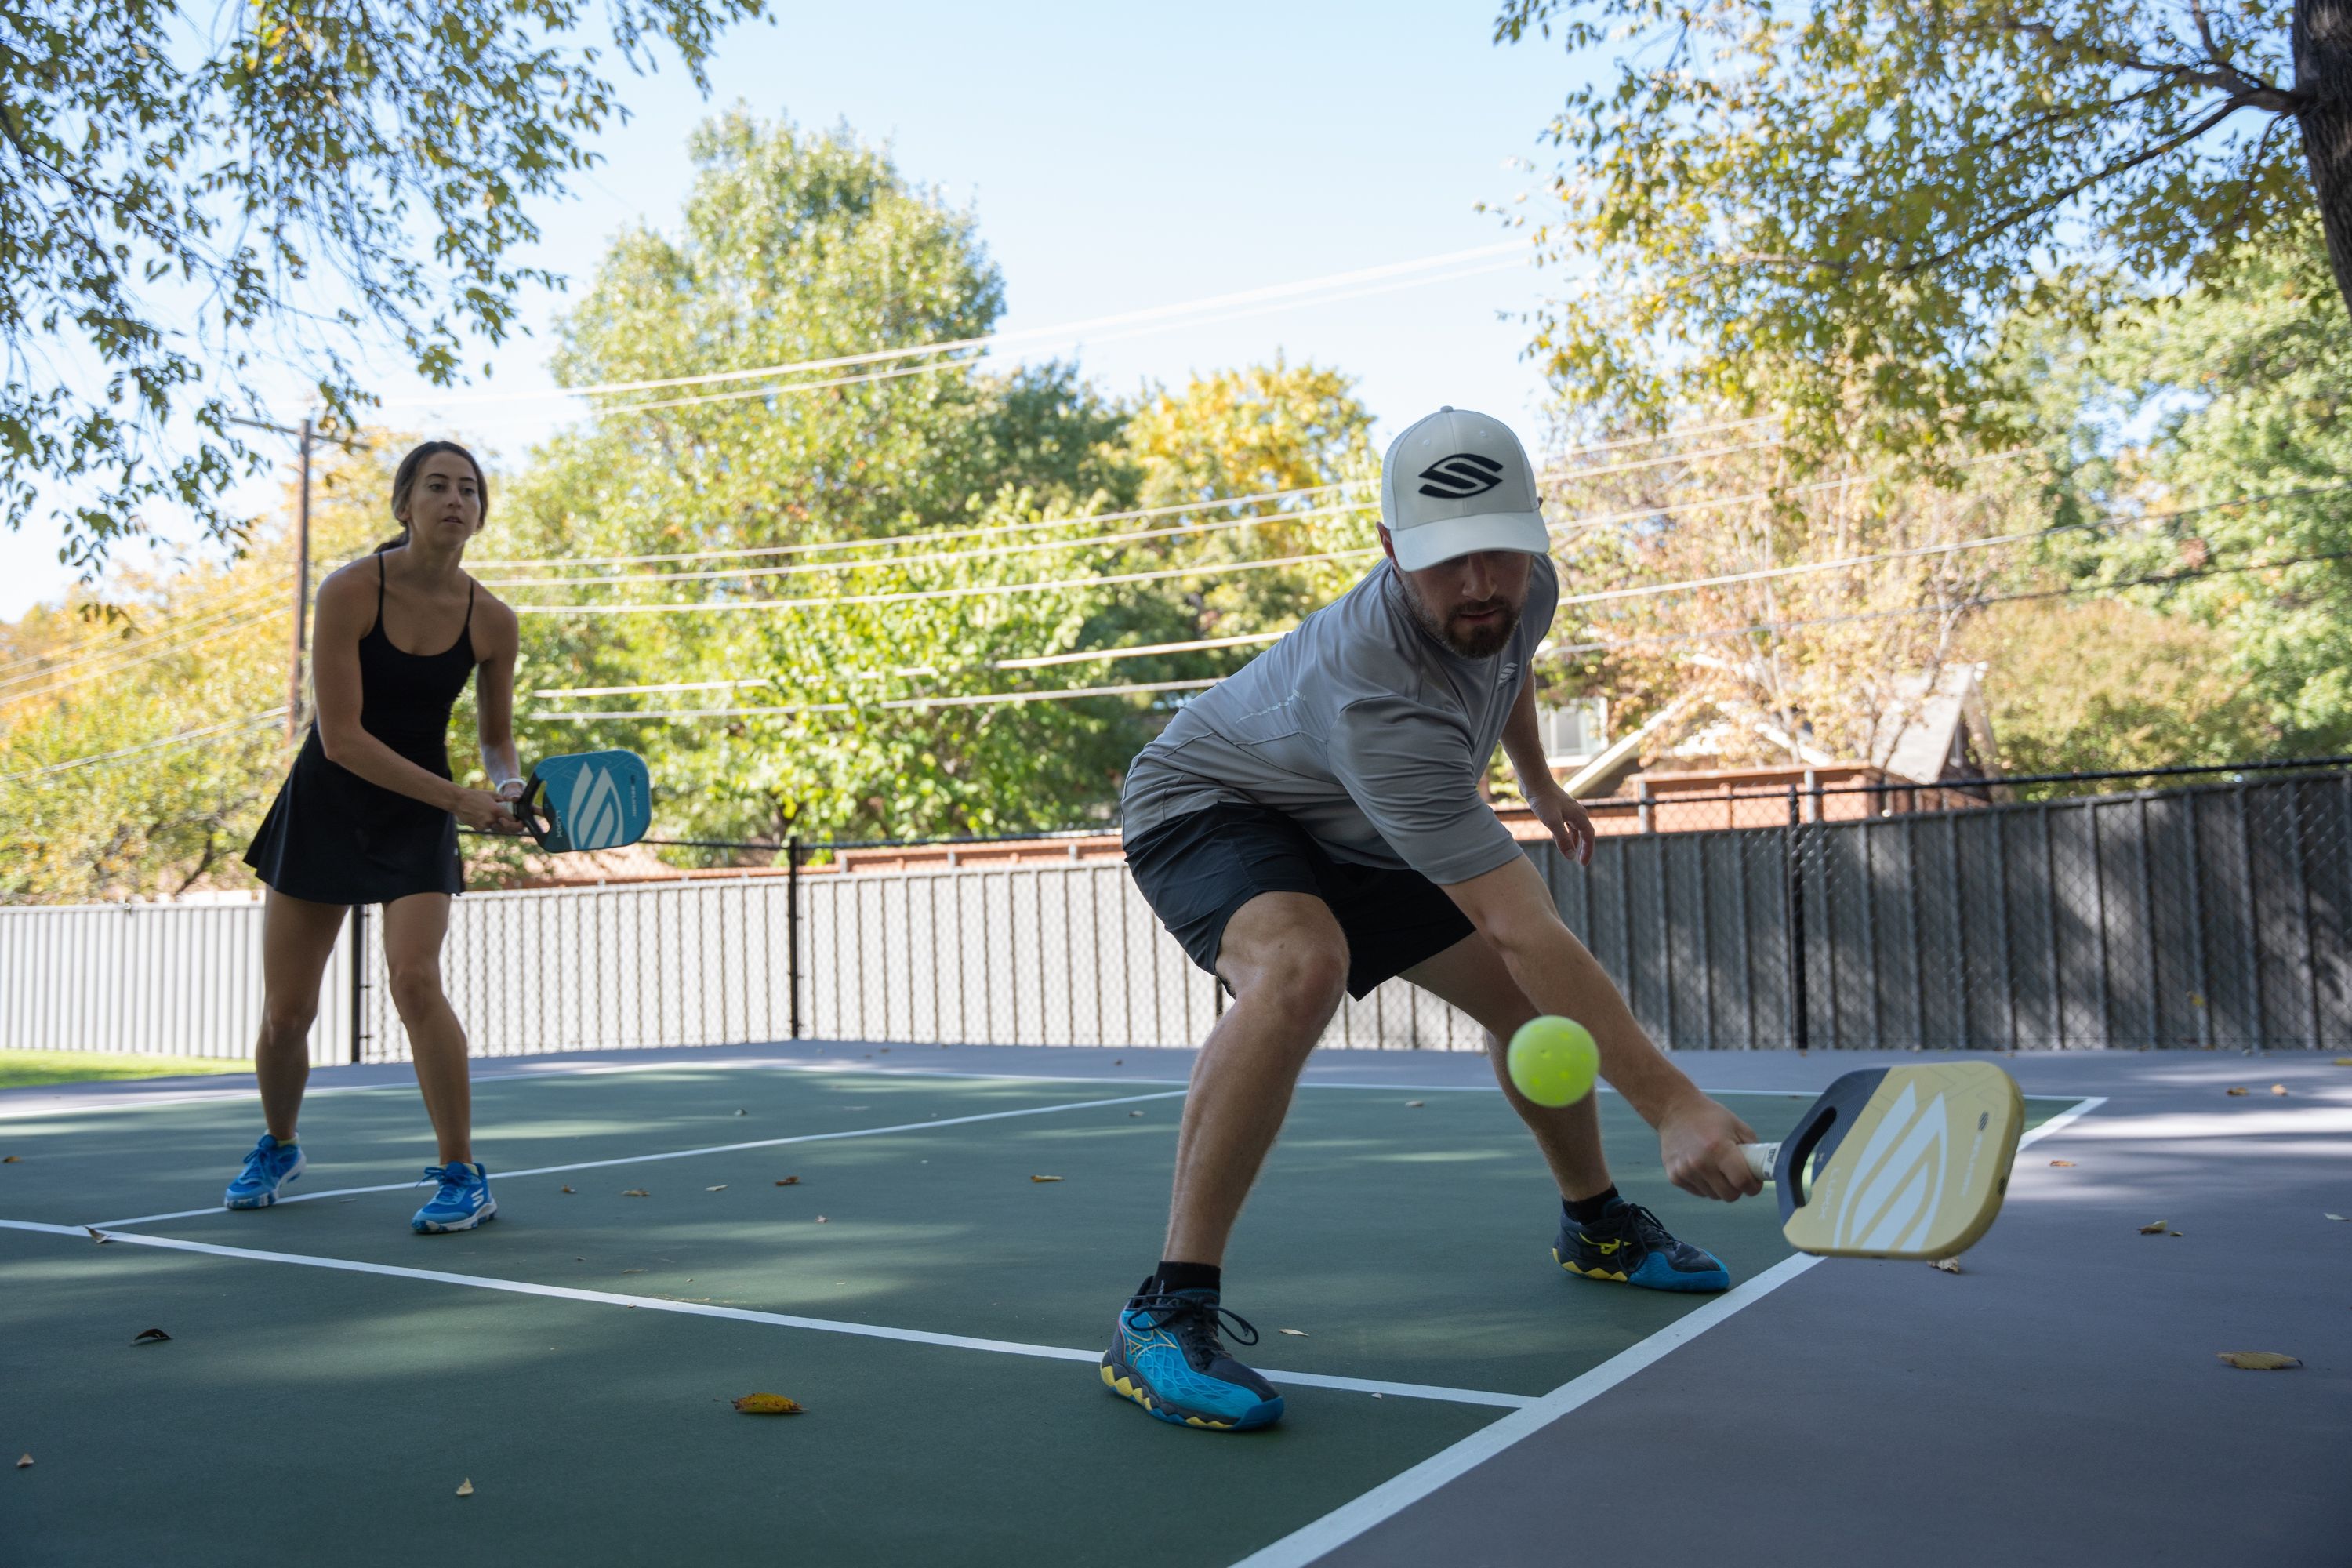 There are a few shots in pickleball that seem like a mistake, especialy the pickleball Erne shot.